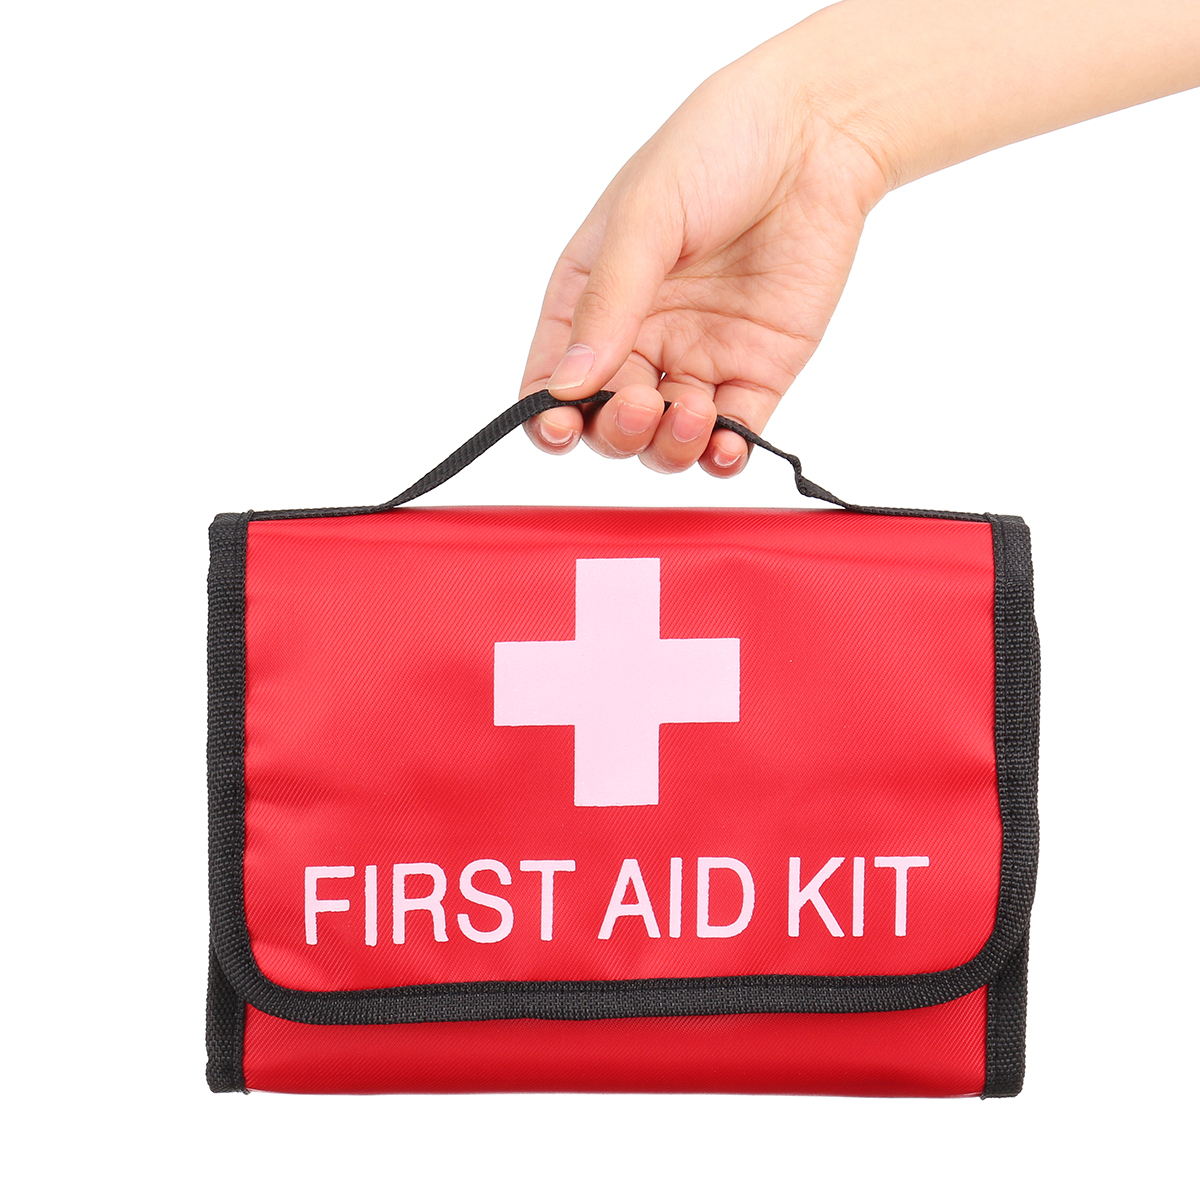 Outdoor-Portable-First-Aid-Kit-Medical-Storage-Bag-Waterproof-Car-Carrying-Household-Emergency-Kit-T-1757235-4